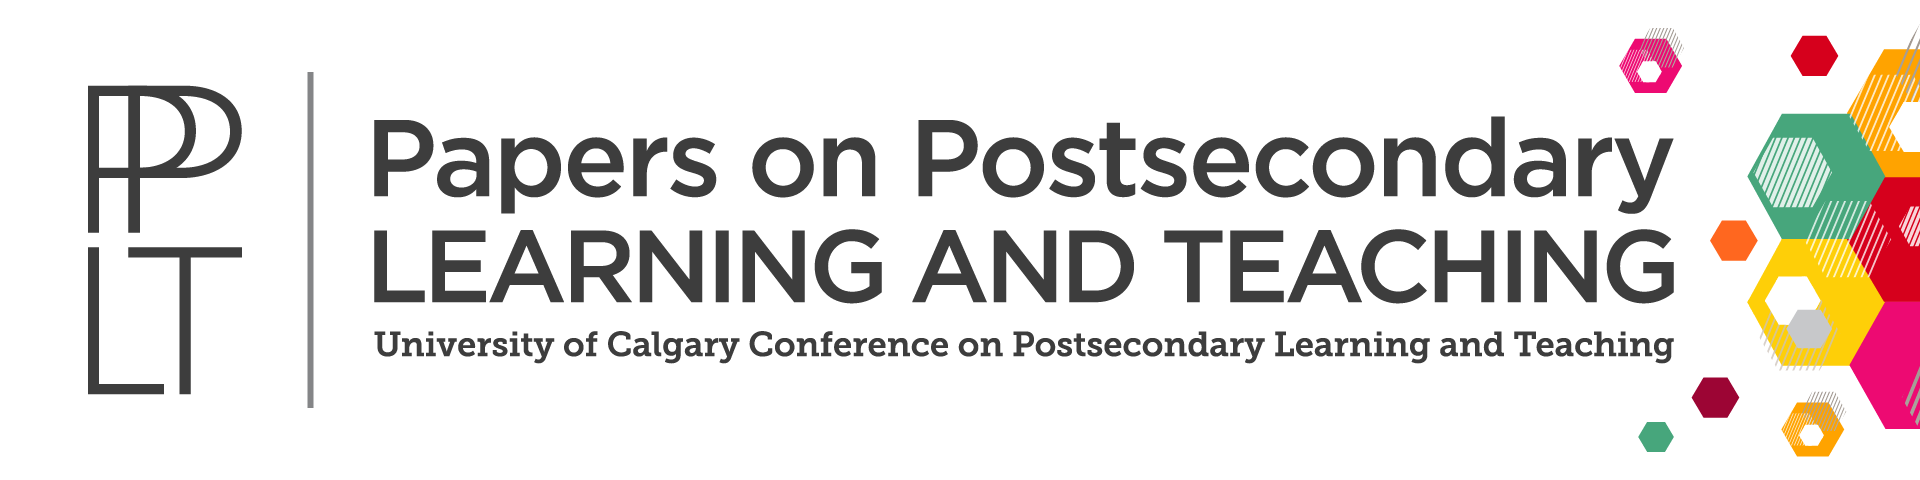 Papers on Postsecondary Learning and Teaching